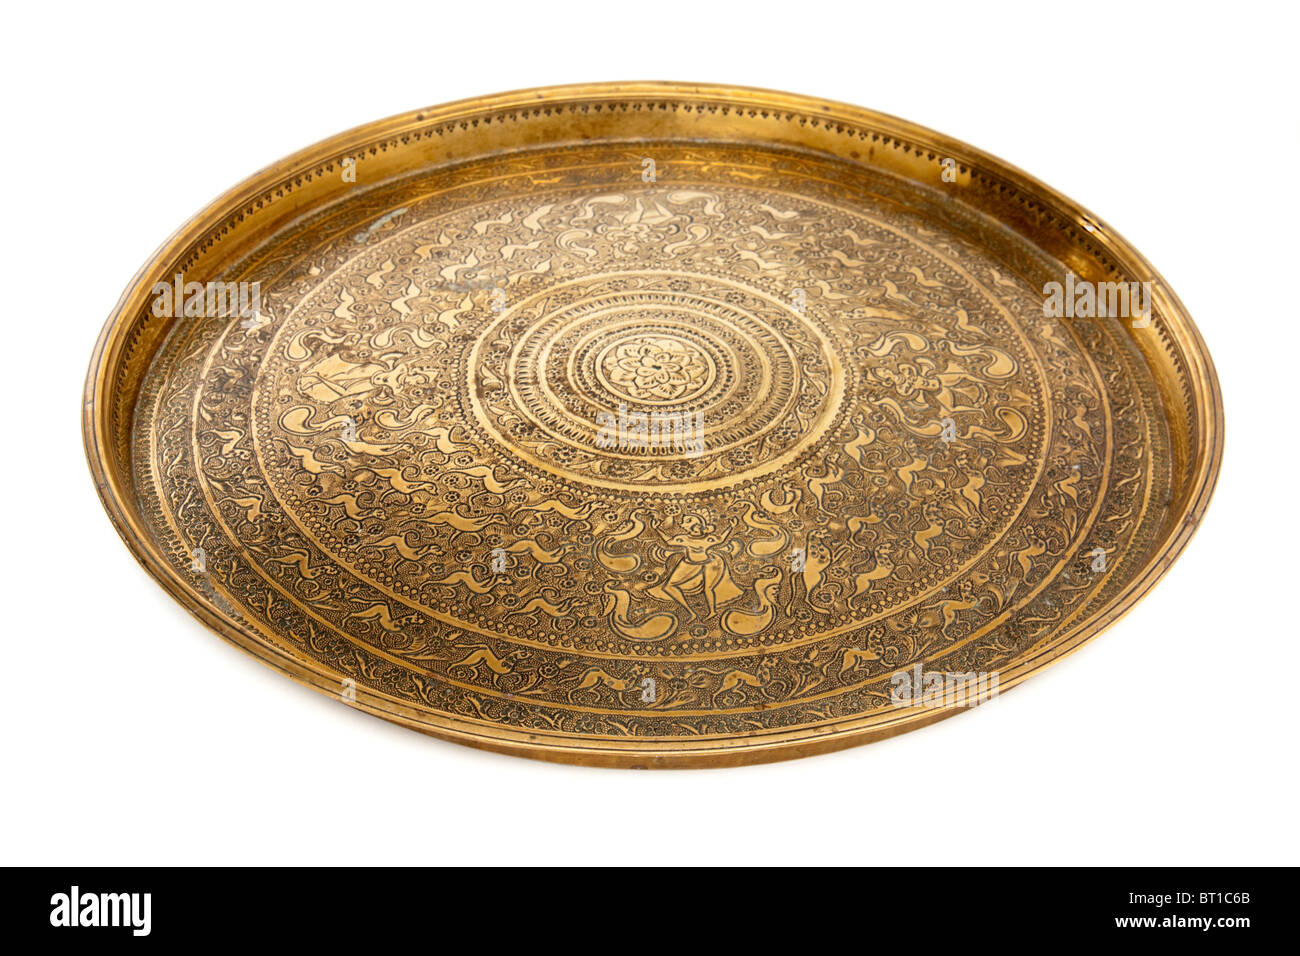 Antique Indian brass serving tray Stock Photo